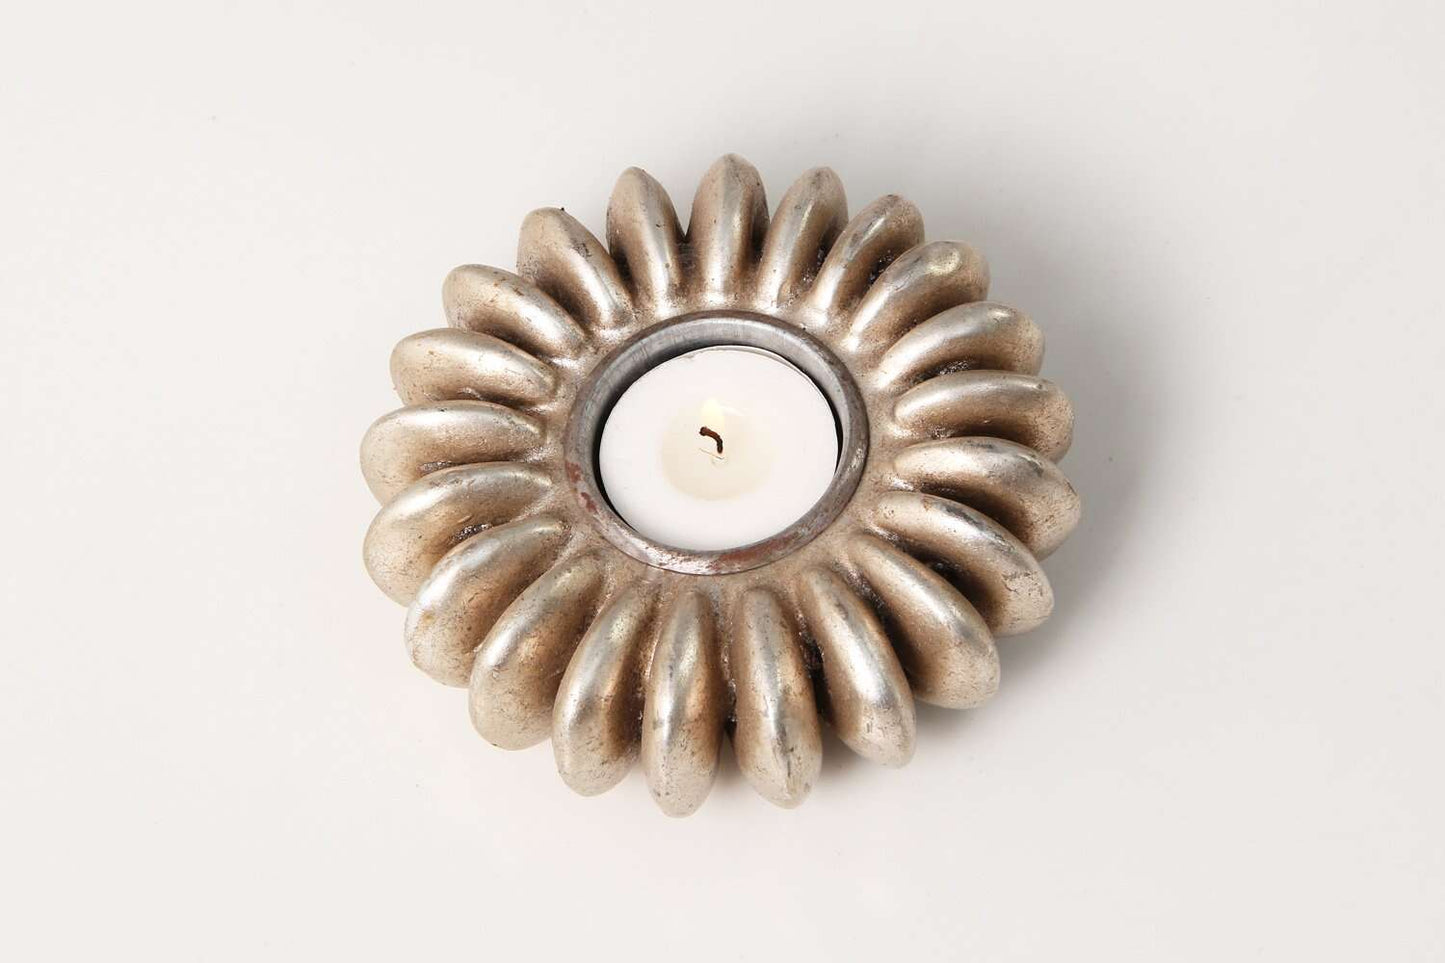 Seed Tea Light Holders in Antique Silver